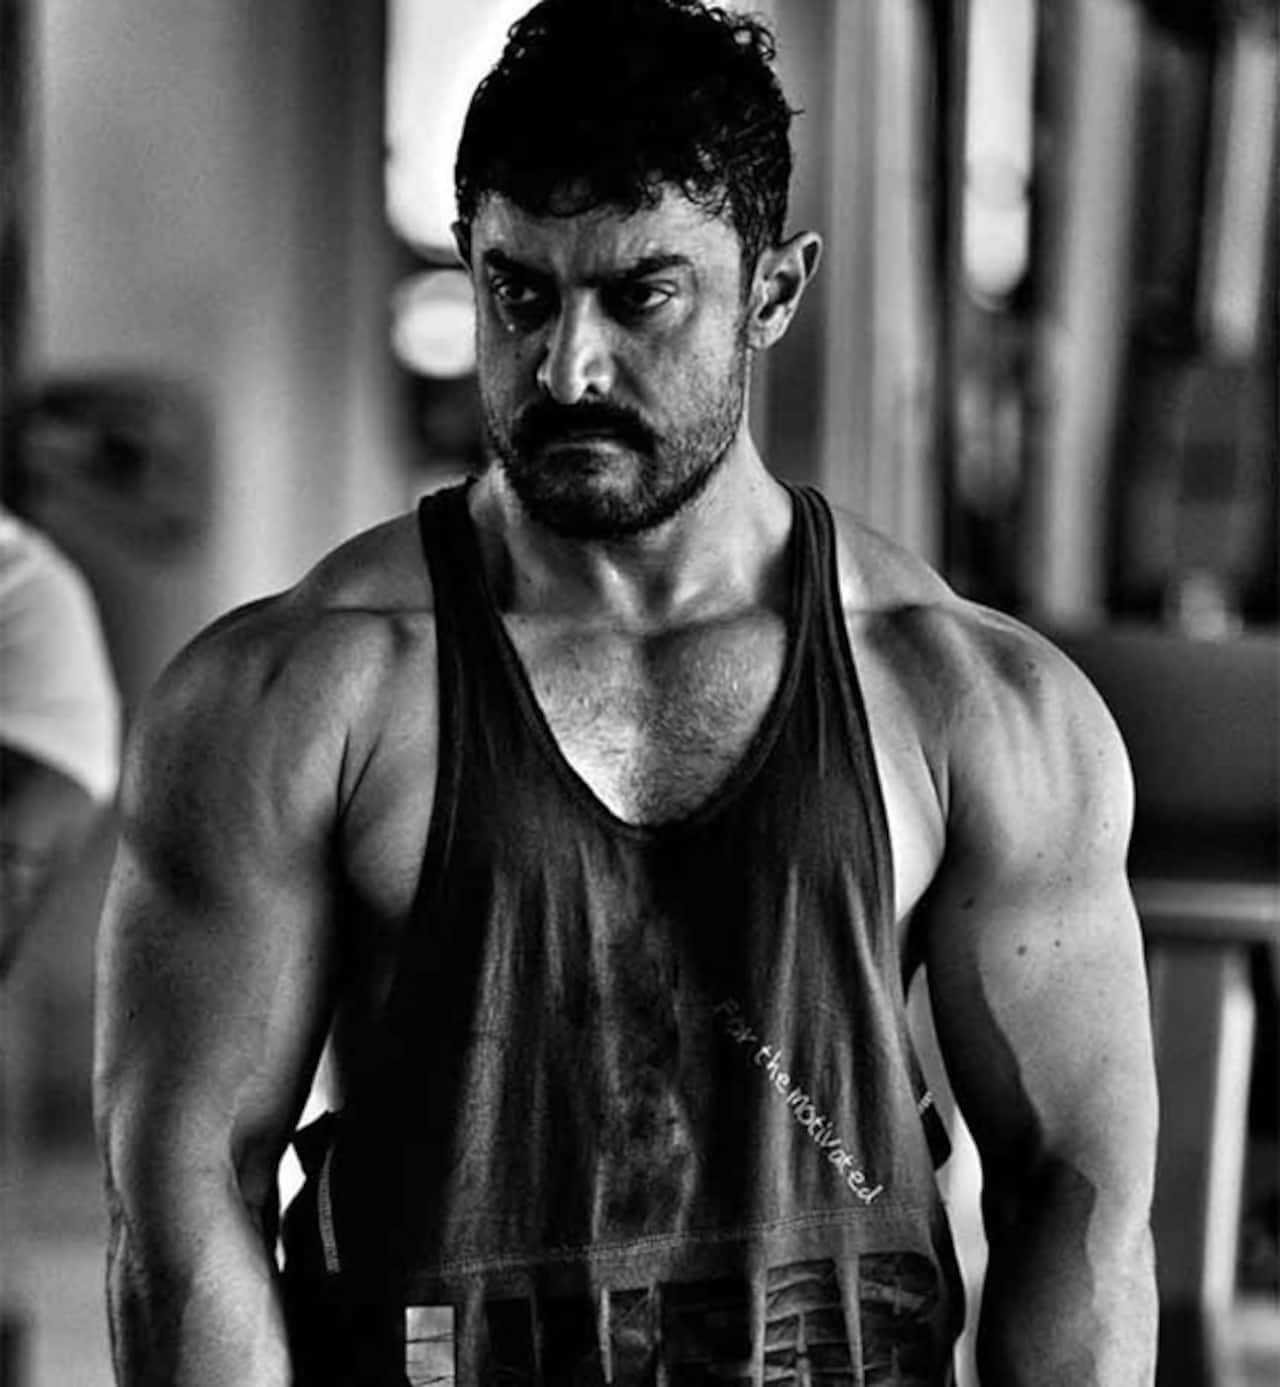 Aamir Khan has a surprise for fans at 5 am tomorrow - watch video